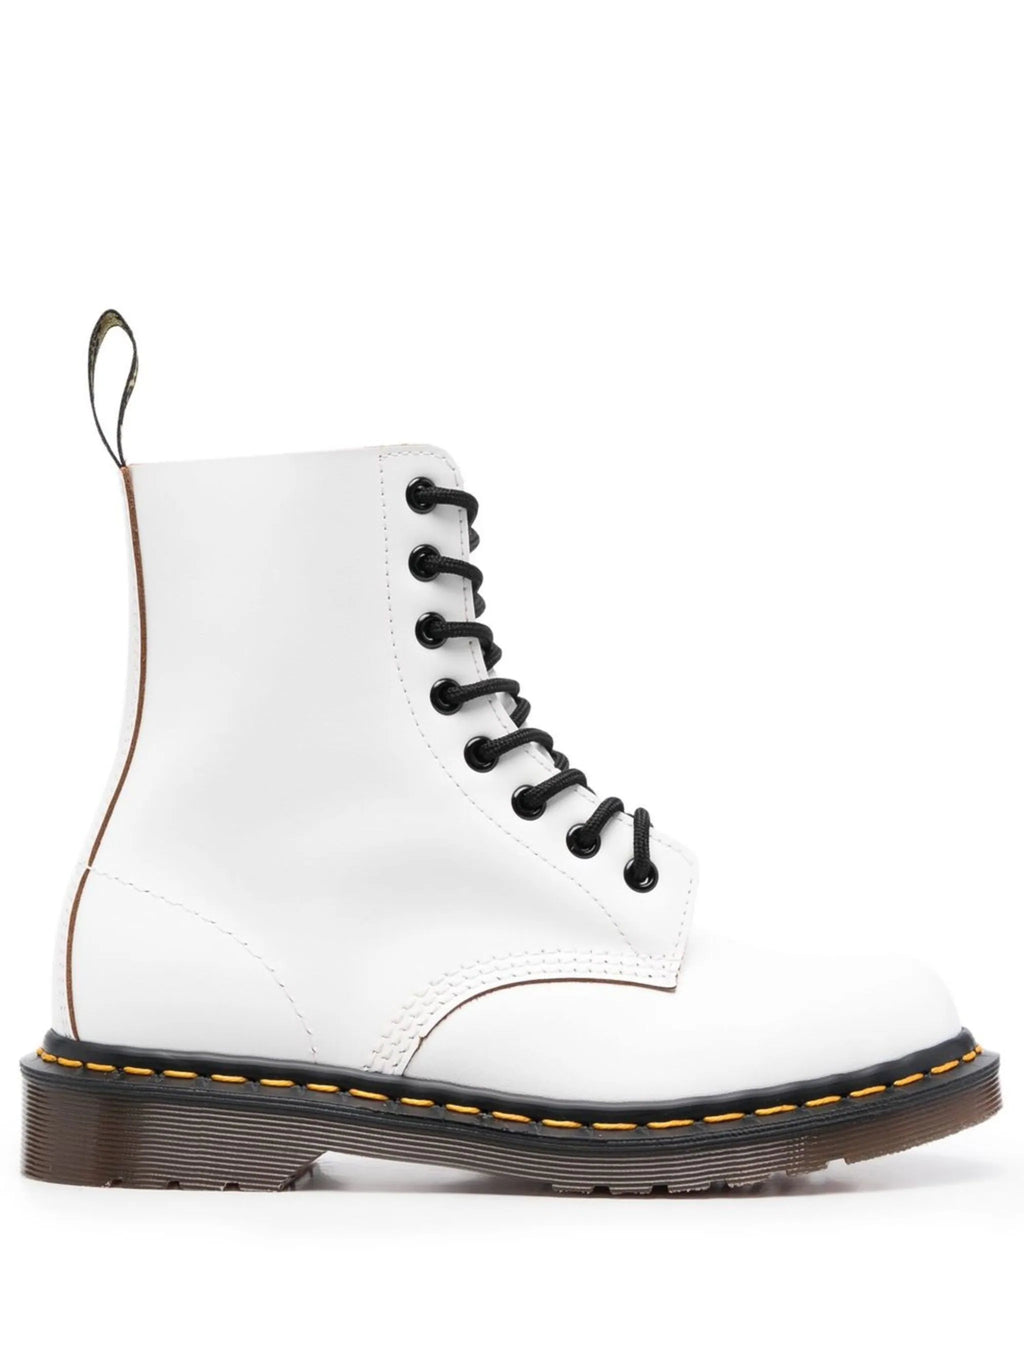 DR. MARTENS 1460 Vintage Made In England Lace Up Boots